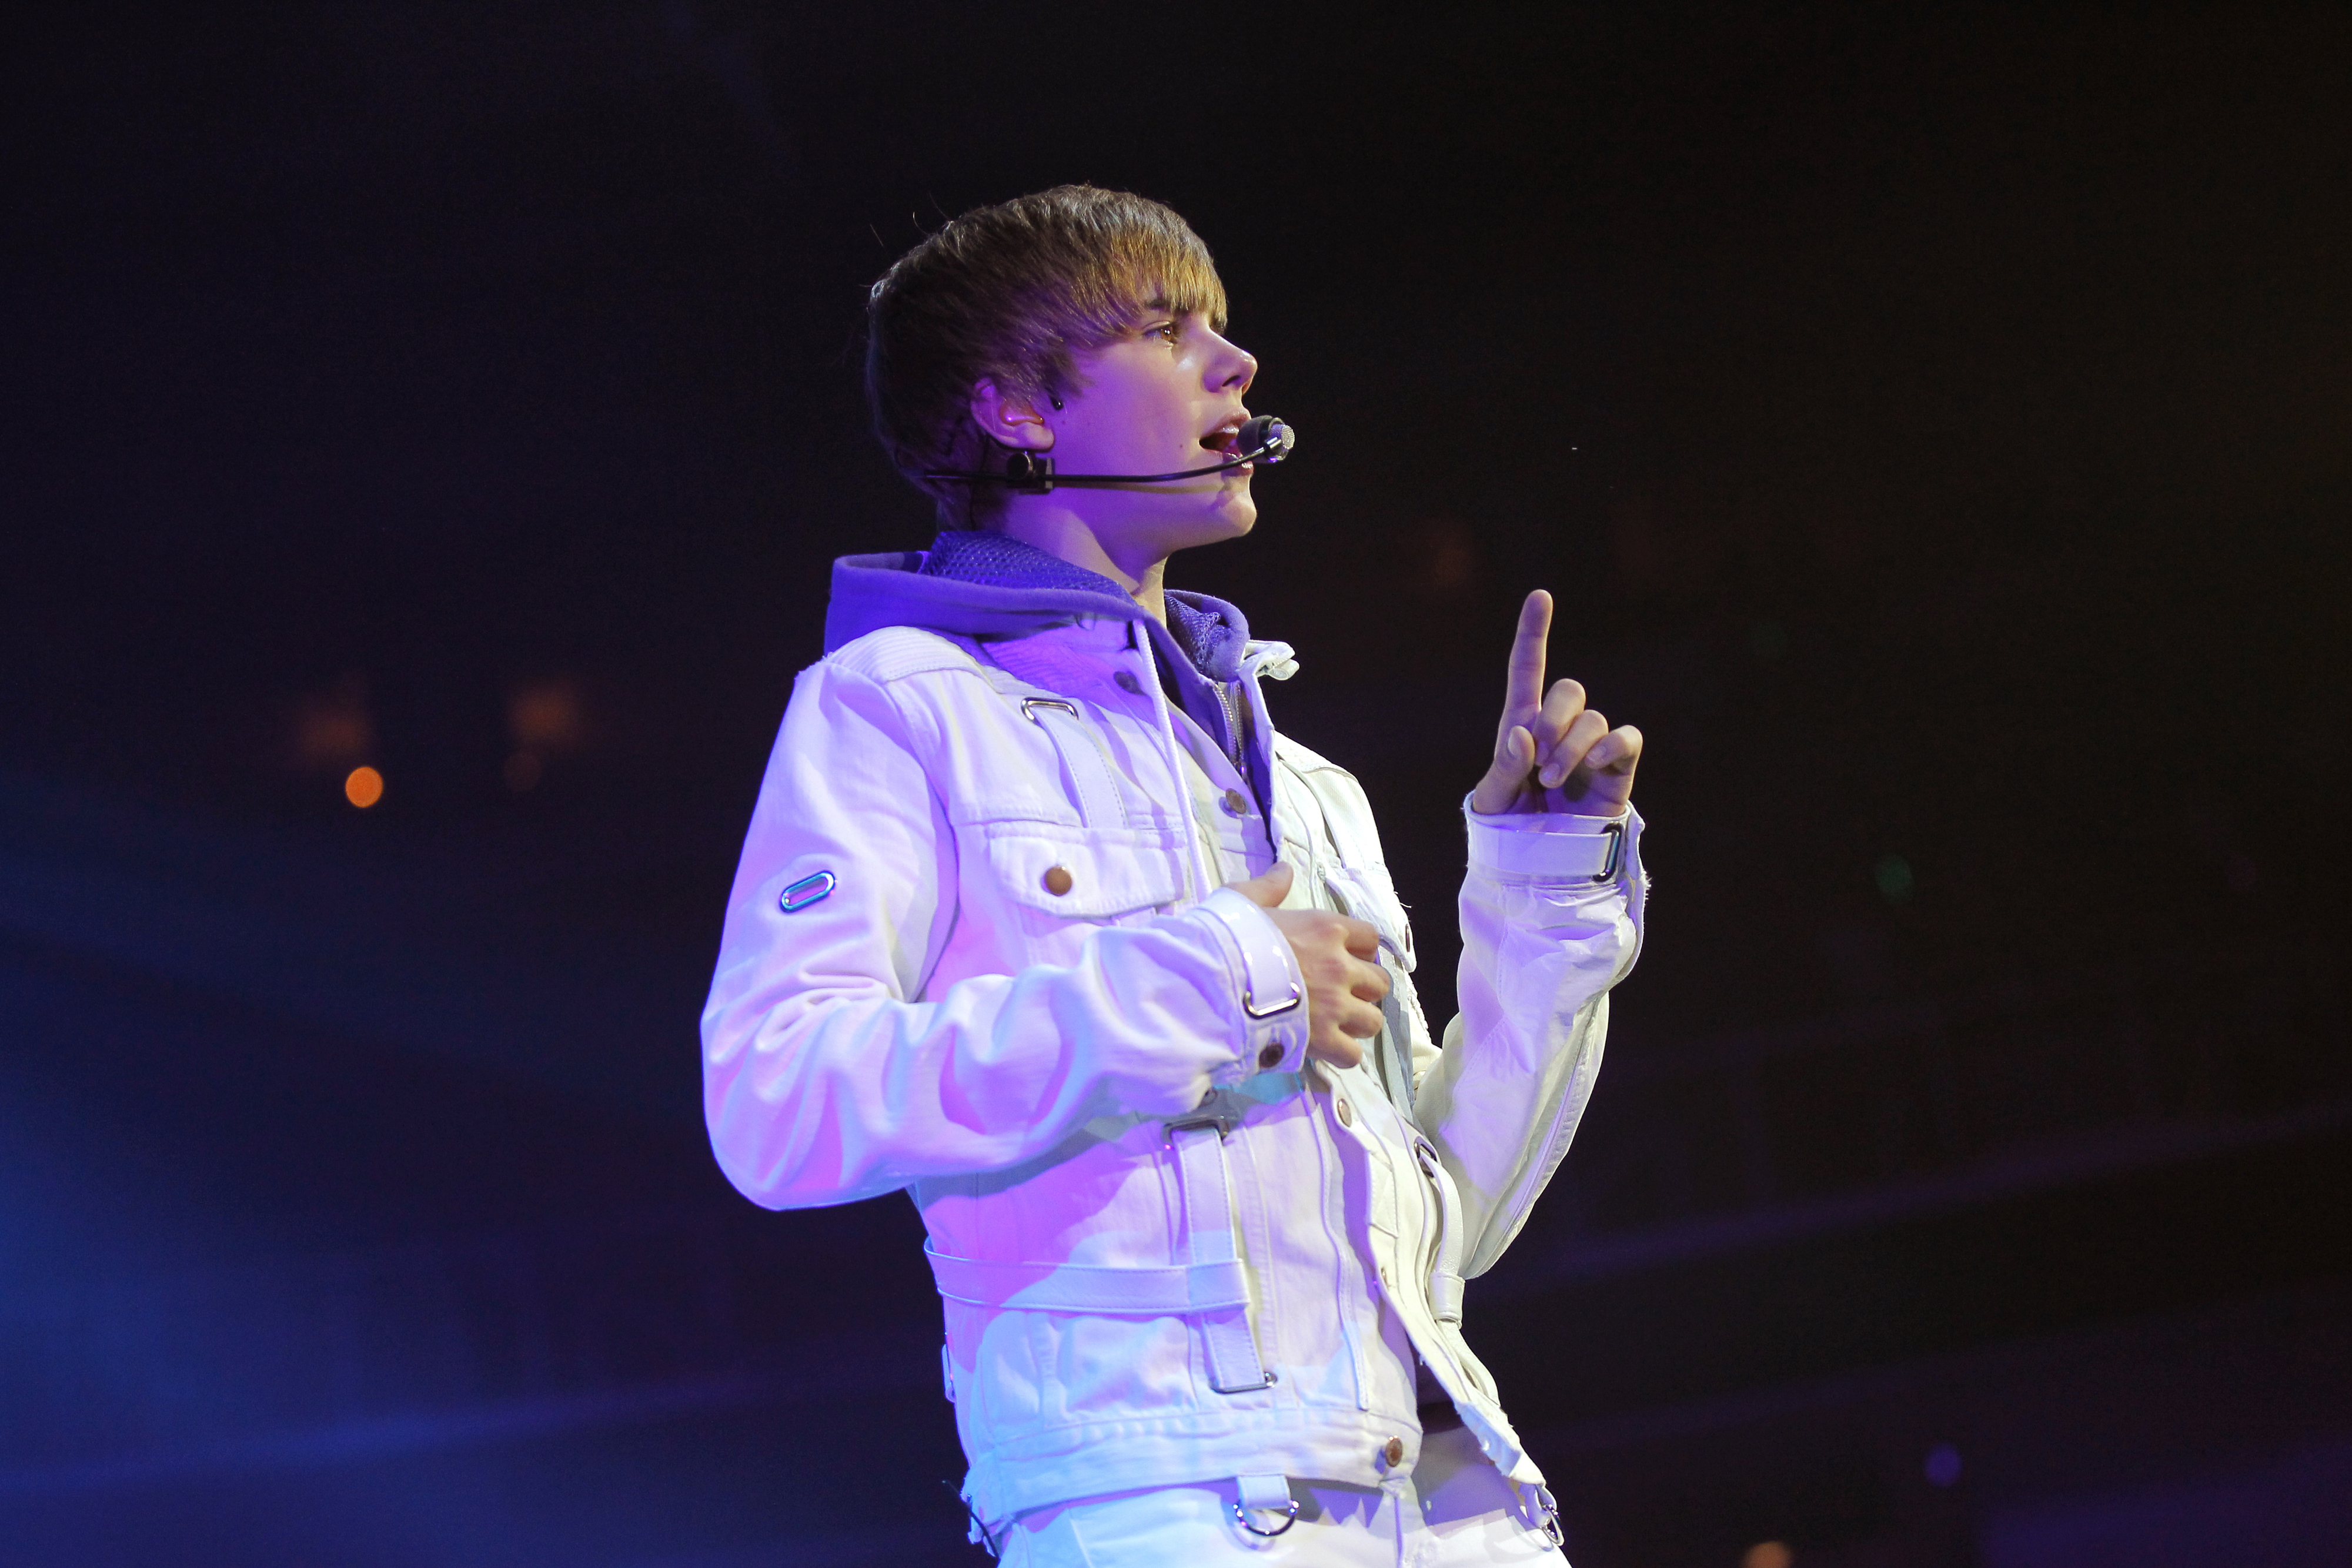 Justin Bieber performing on stage, wearing a casual jacket and headset microphone, gesturing with one hand